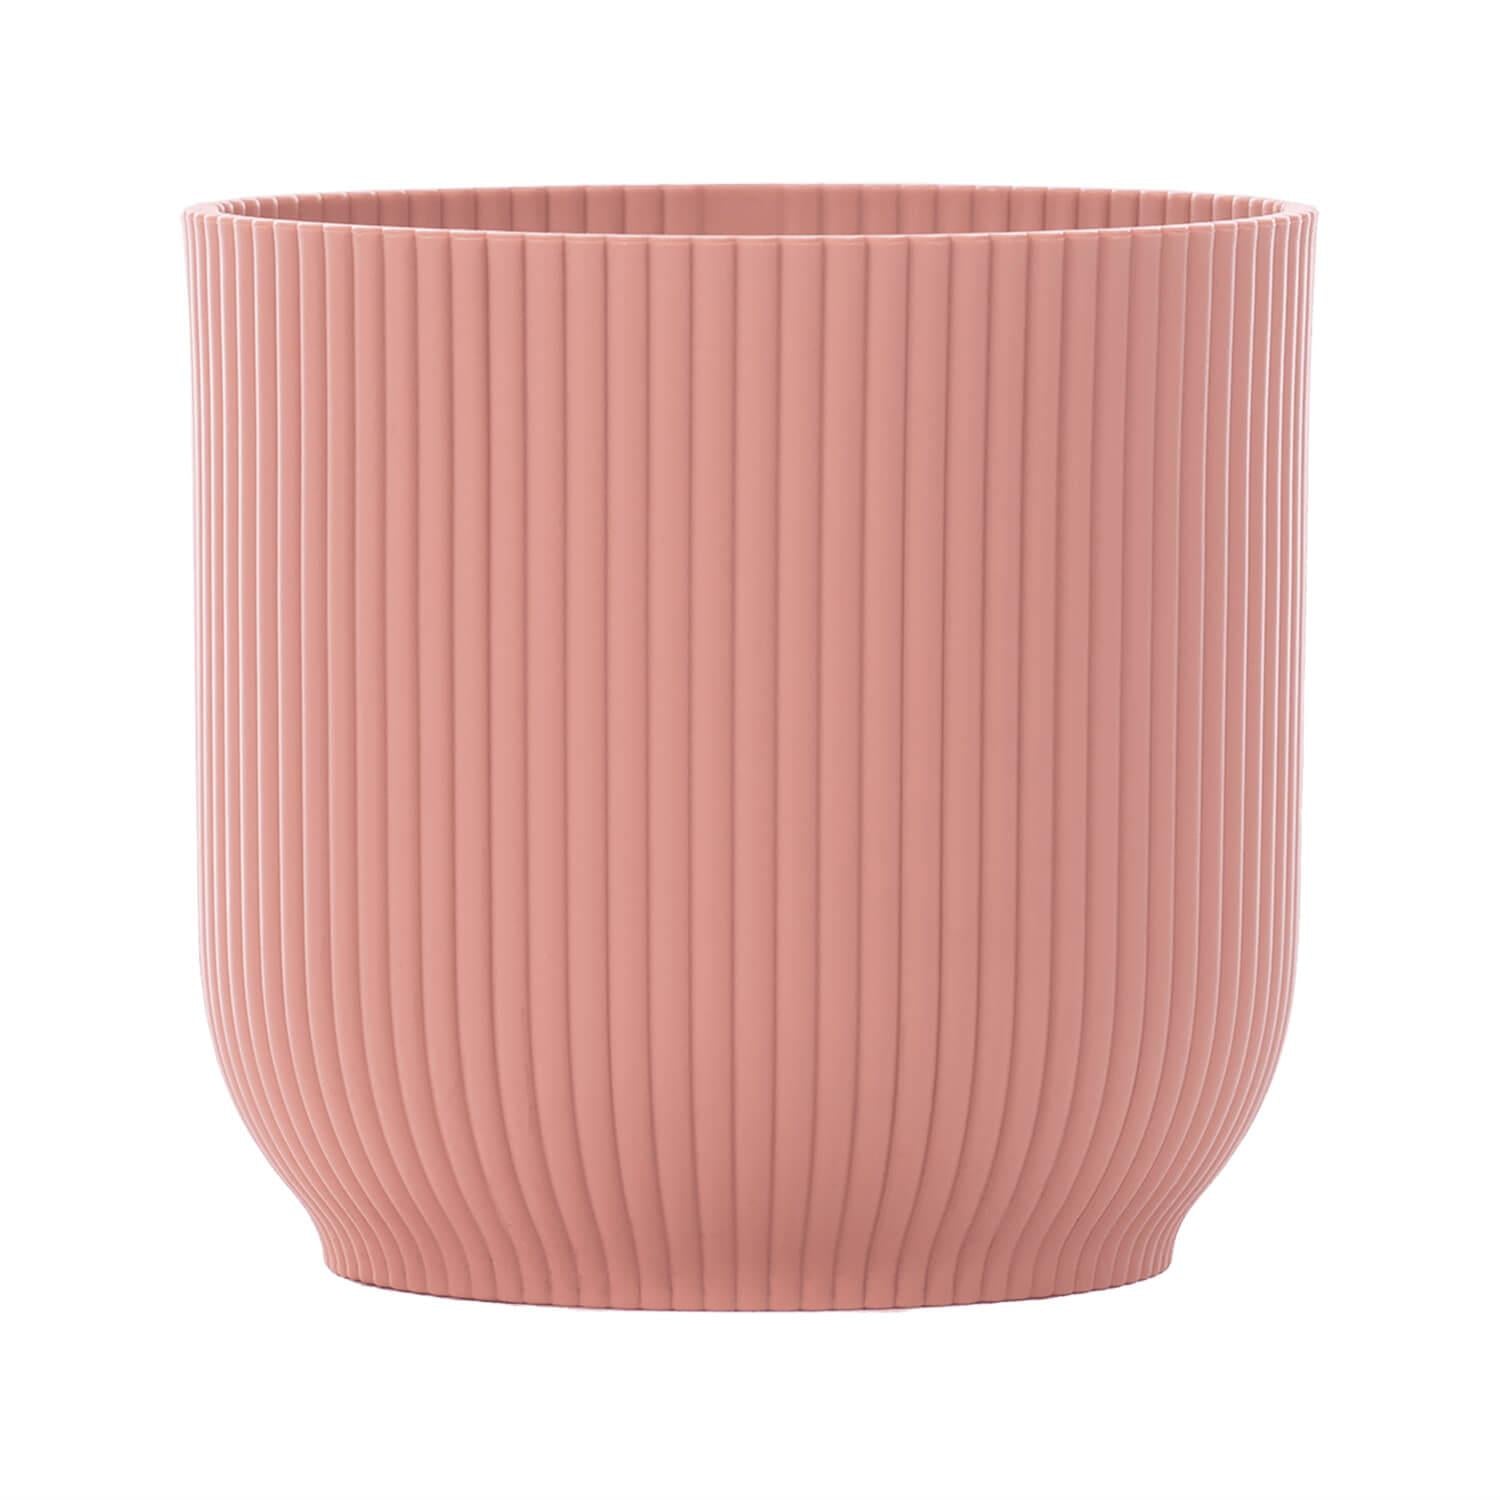 Ash Recycled Plant Pot in Pink